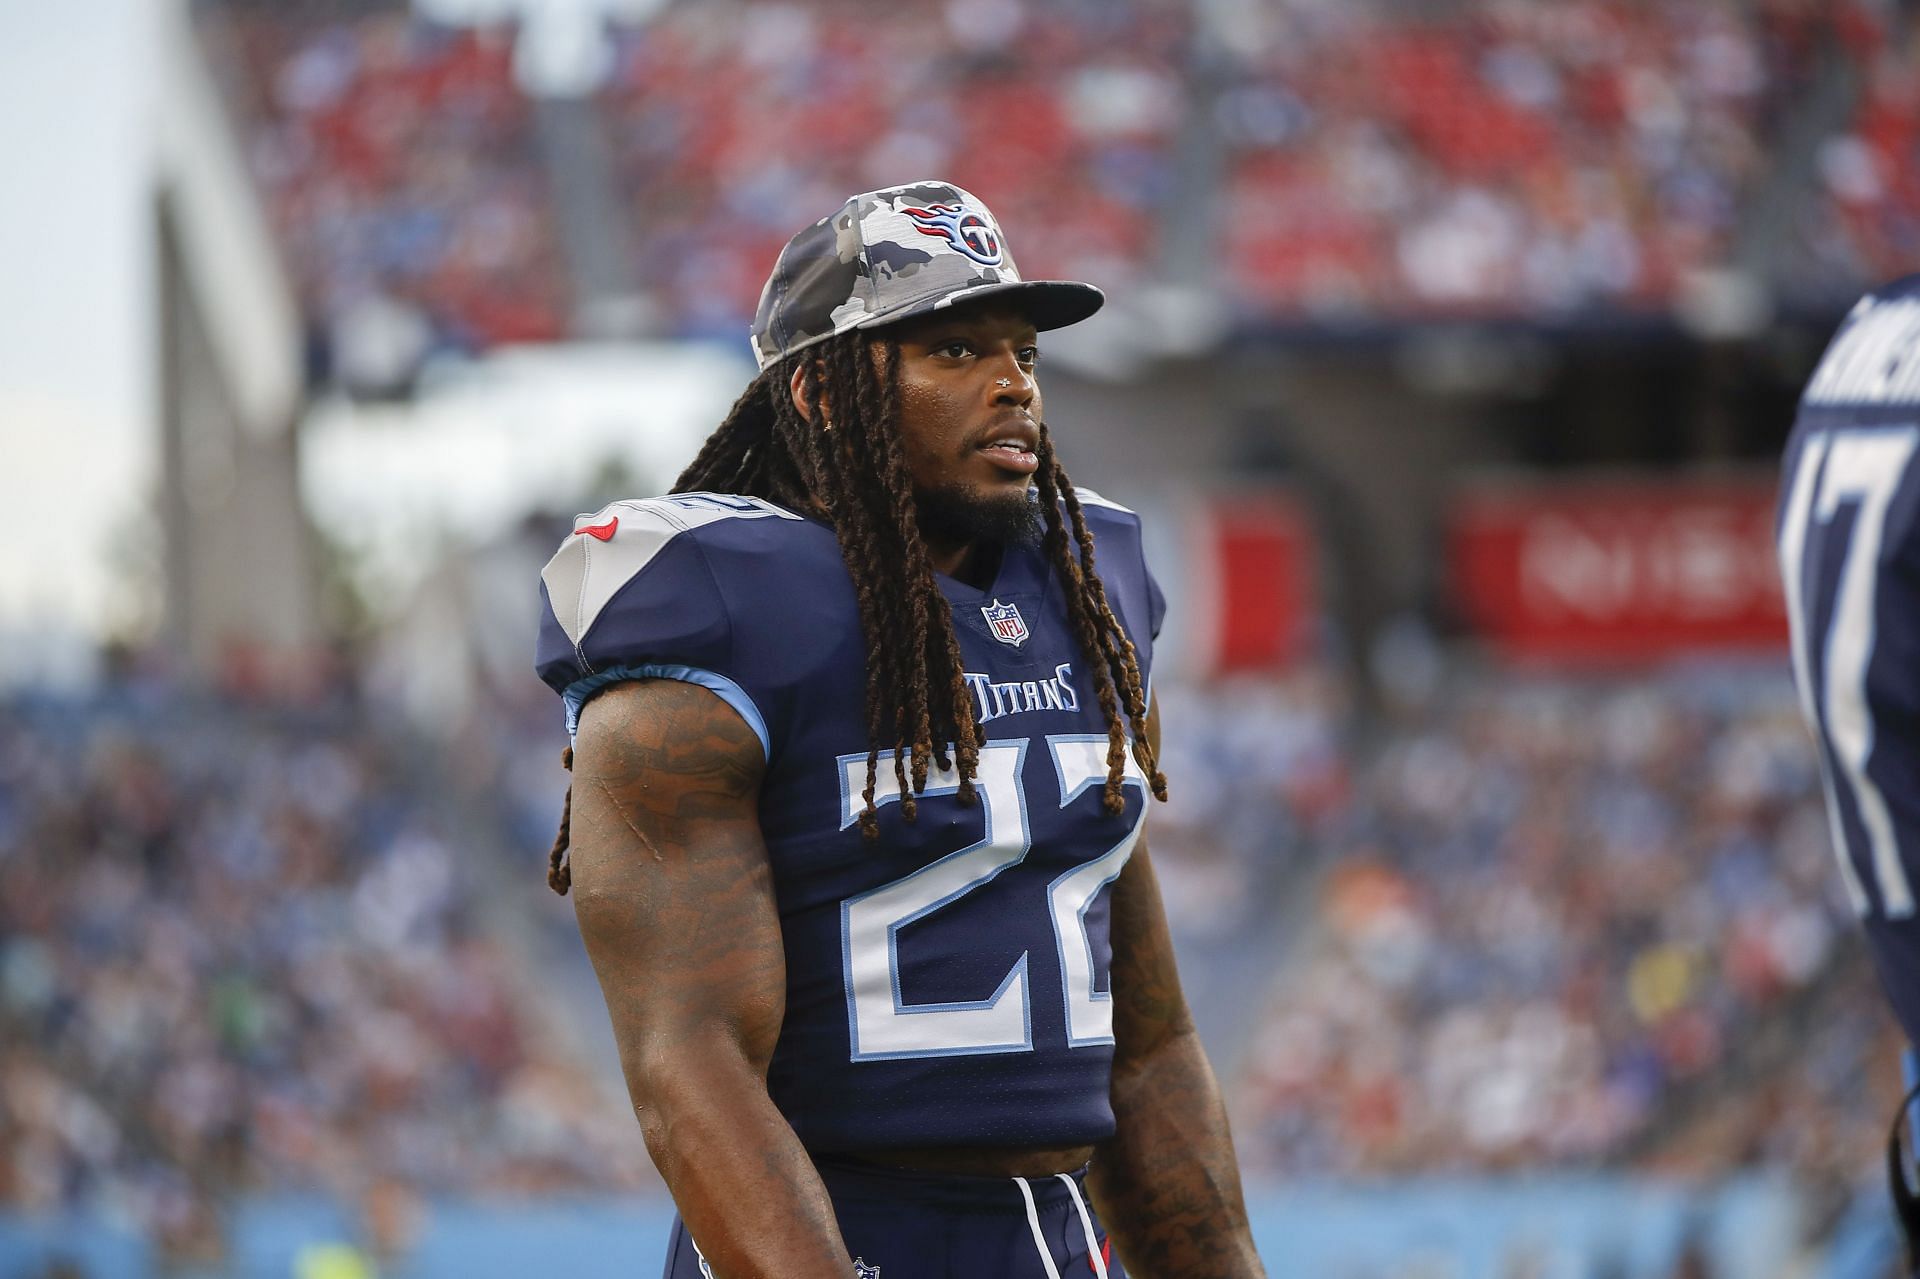 NFL Top 100 - Derrick Henry of the Tennessee Titans